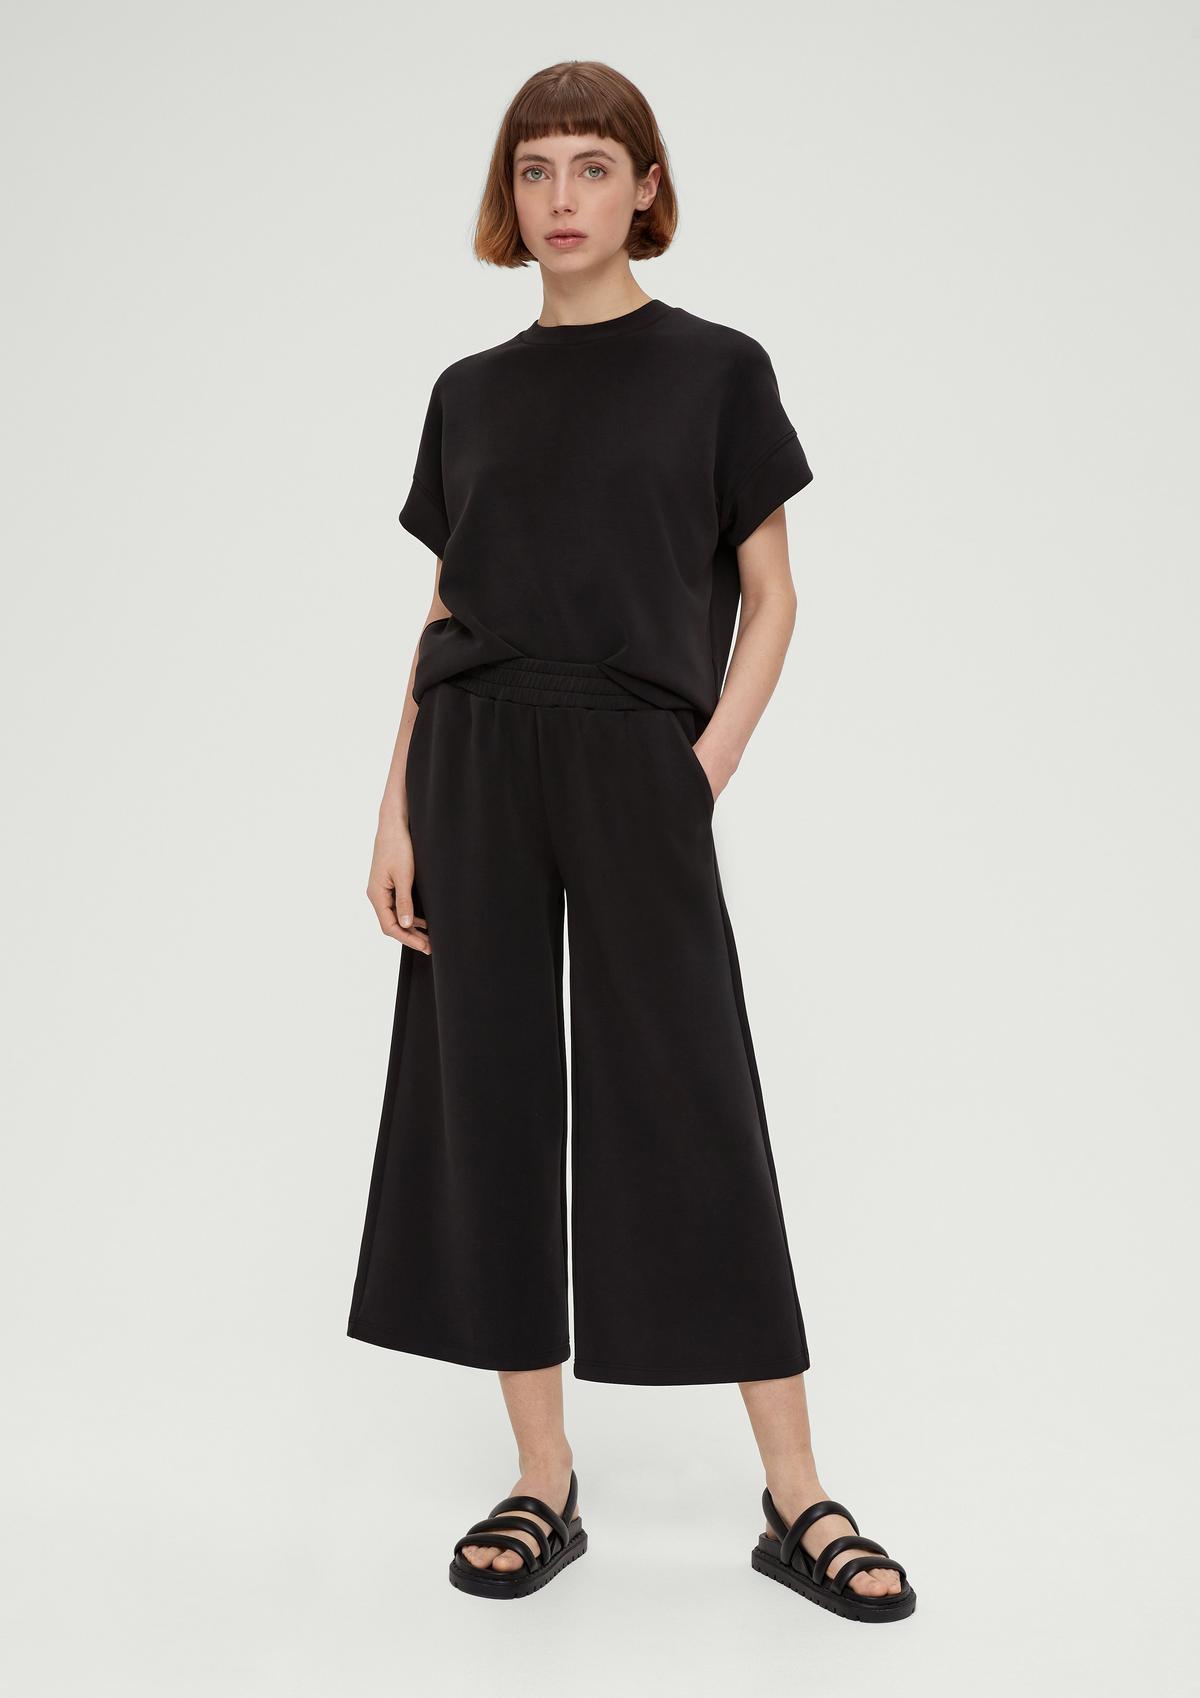 Culottes: Order now in the  online shop